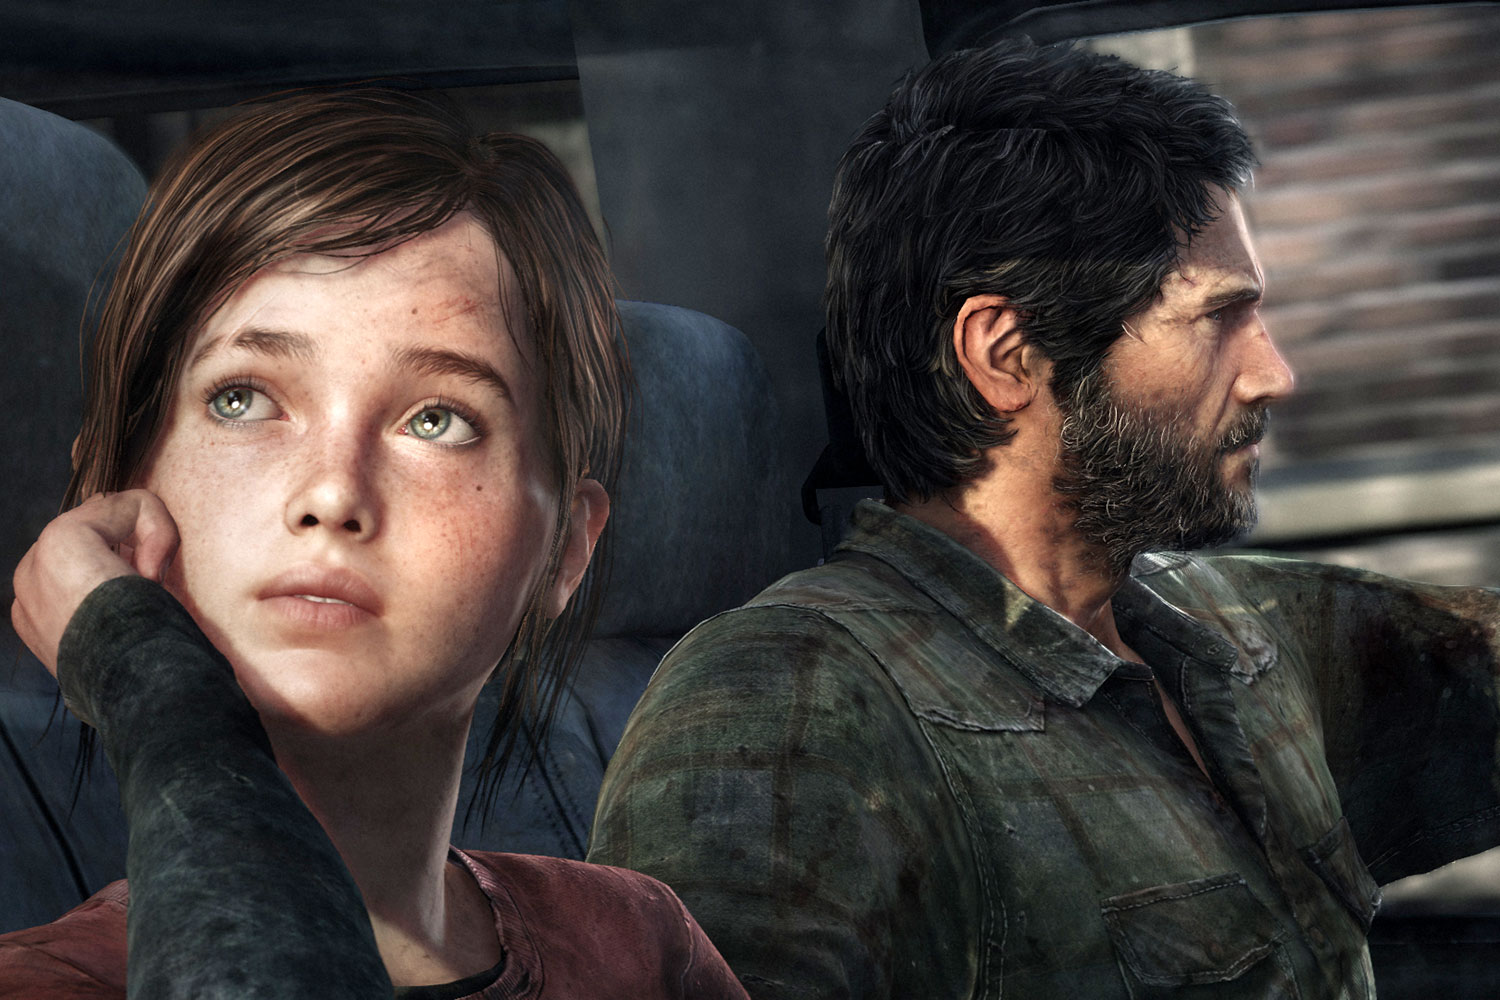 Neil Druckmann and Halley Gross play characters in The Last of Us 2, and  we've only just noticed